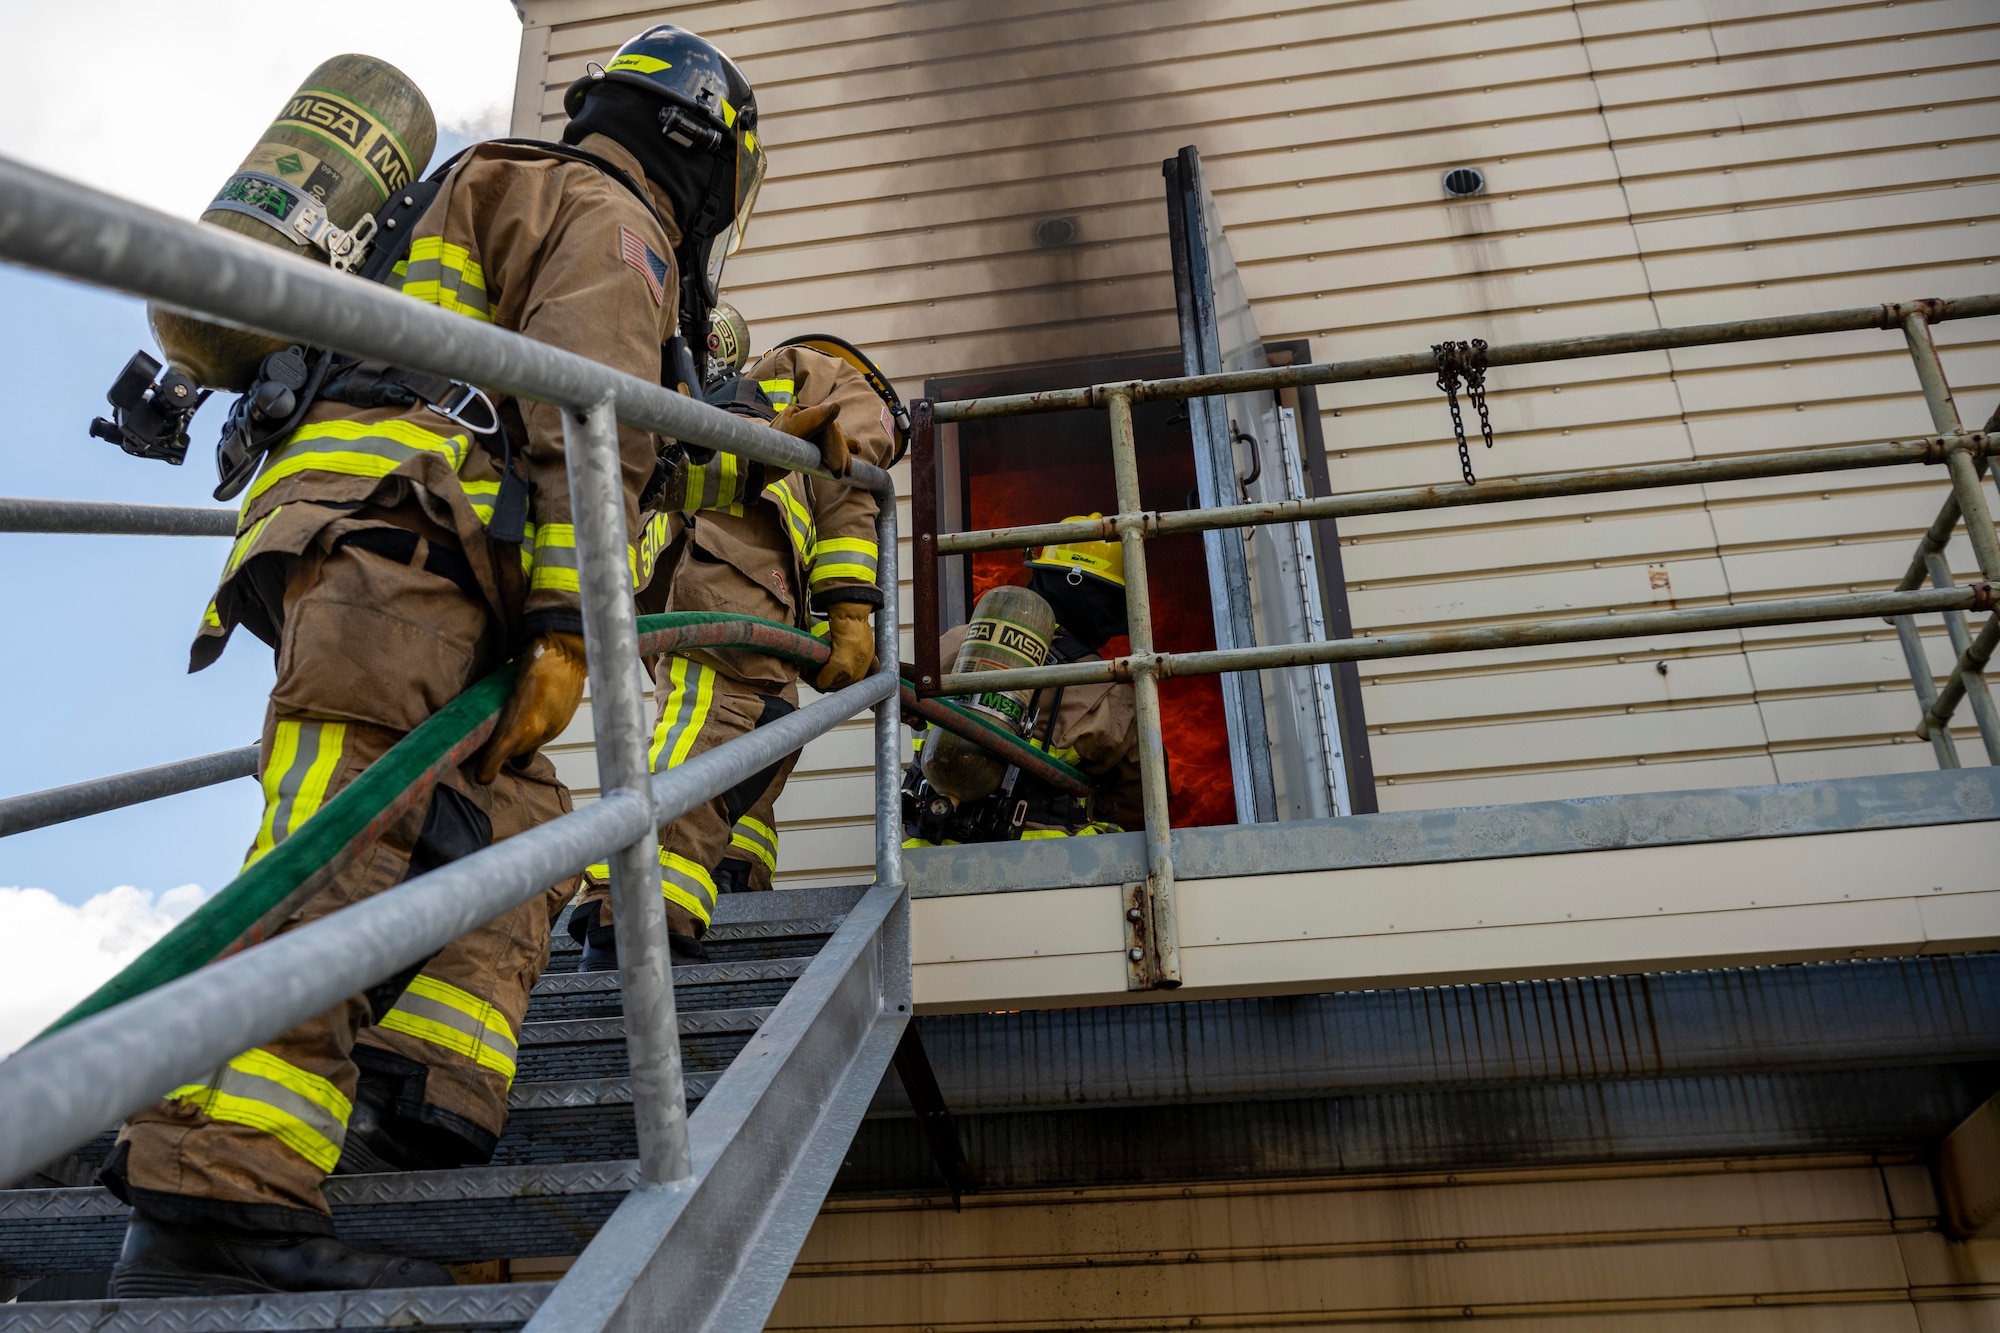 Firefighters walking up stairs.